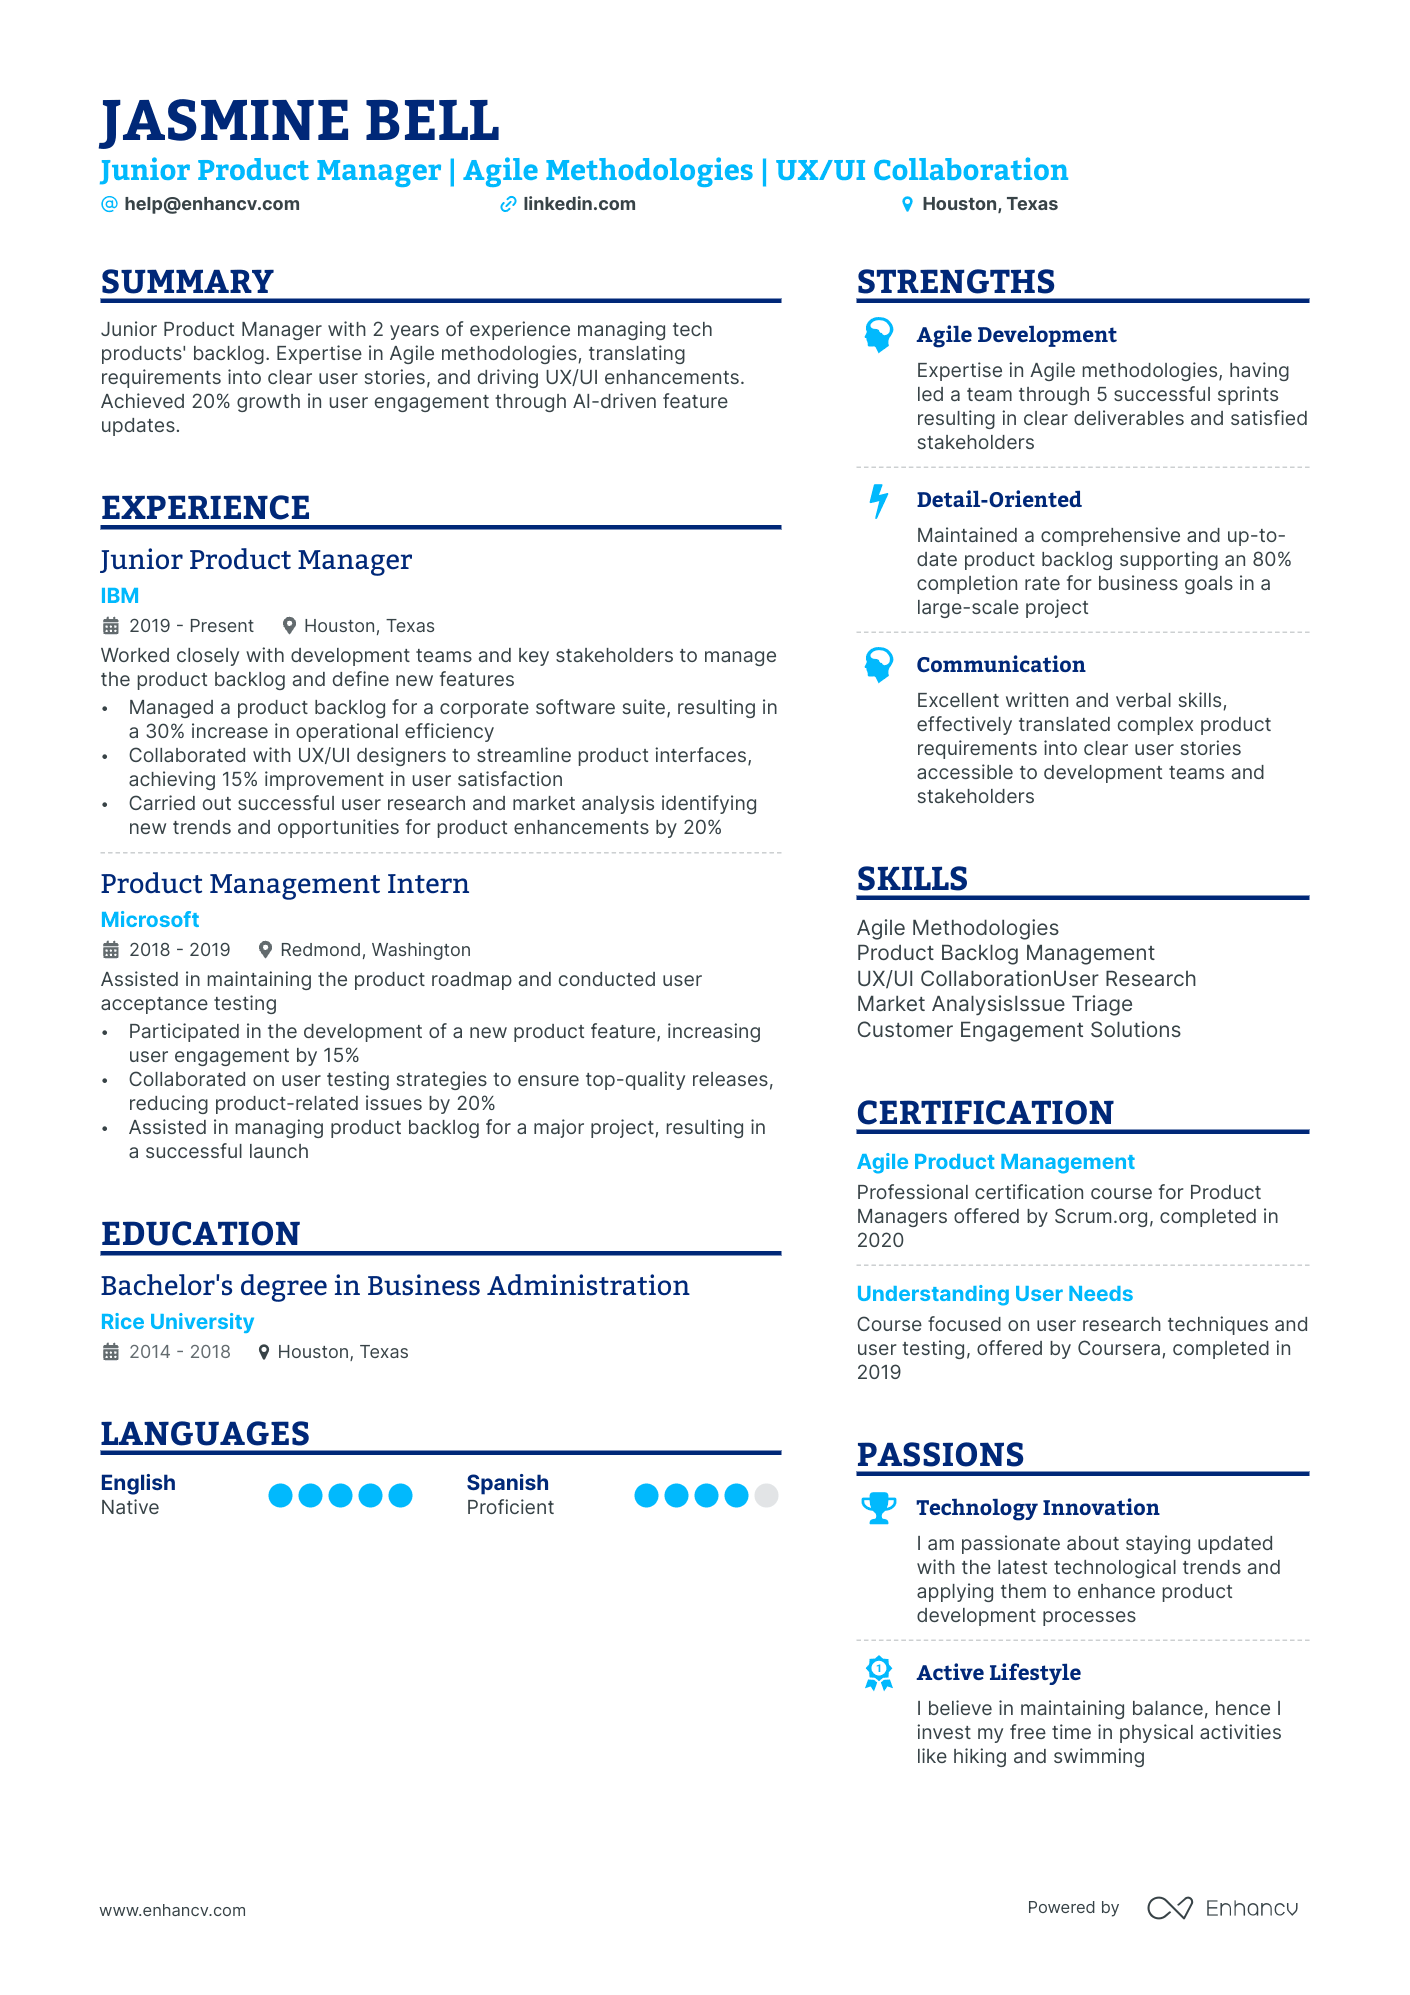 Junior Product Manager resume example